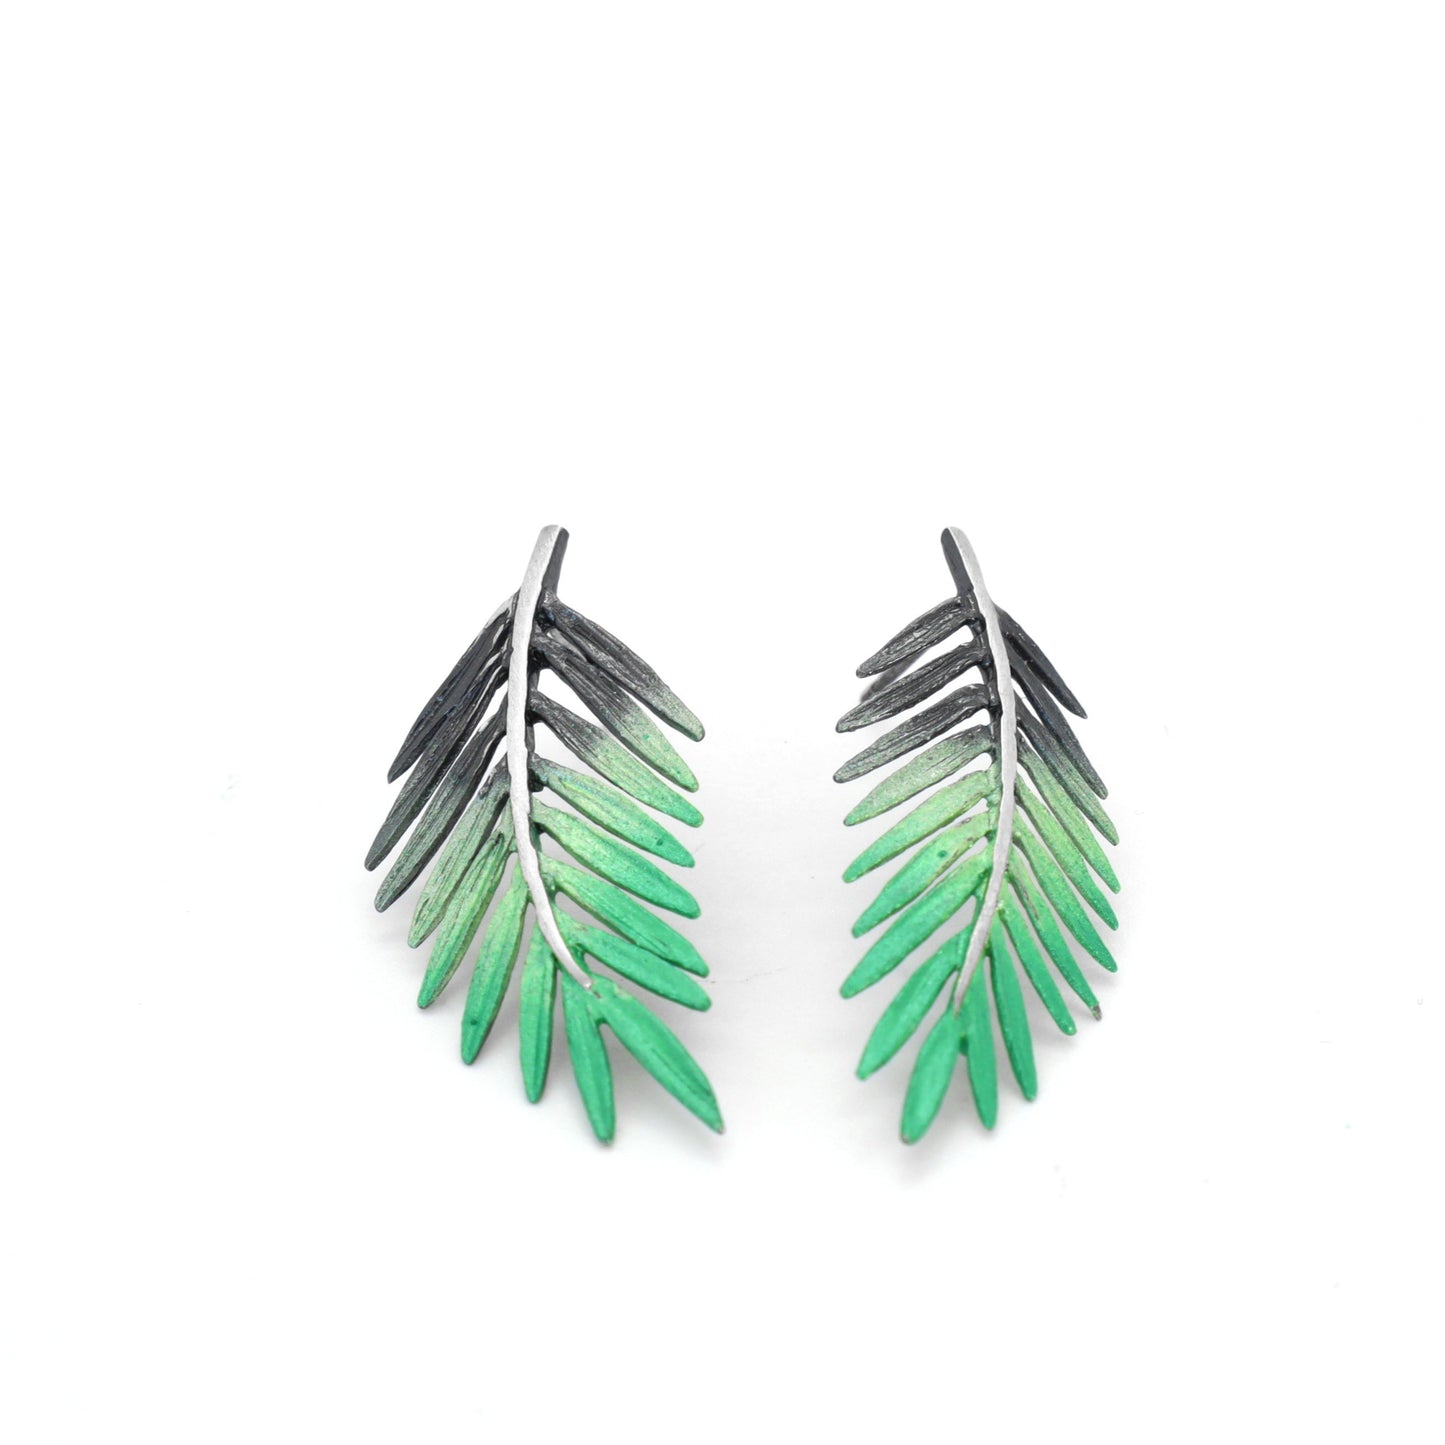 sterling silver palm tree earring with a natural green pigment by orfega compostela. Sterling silver post back